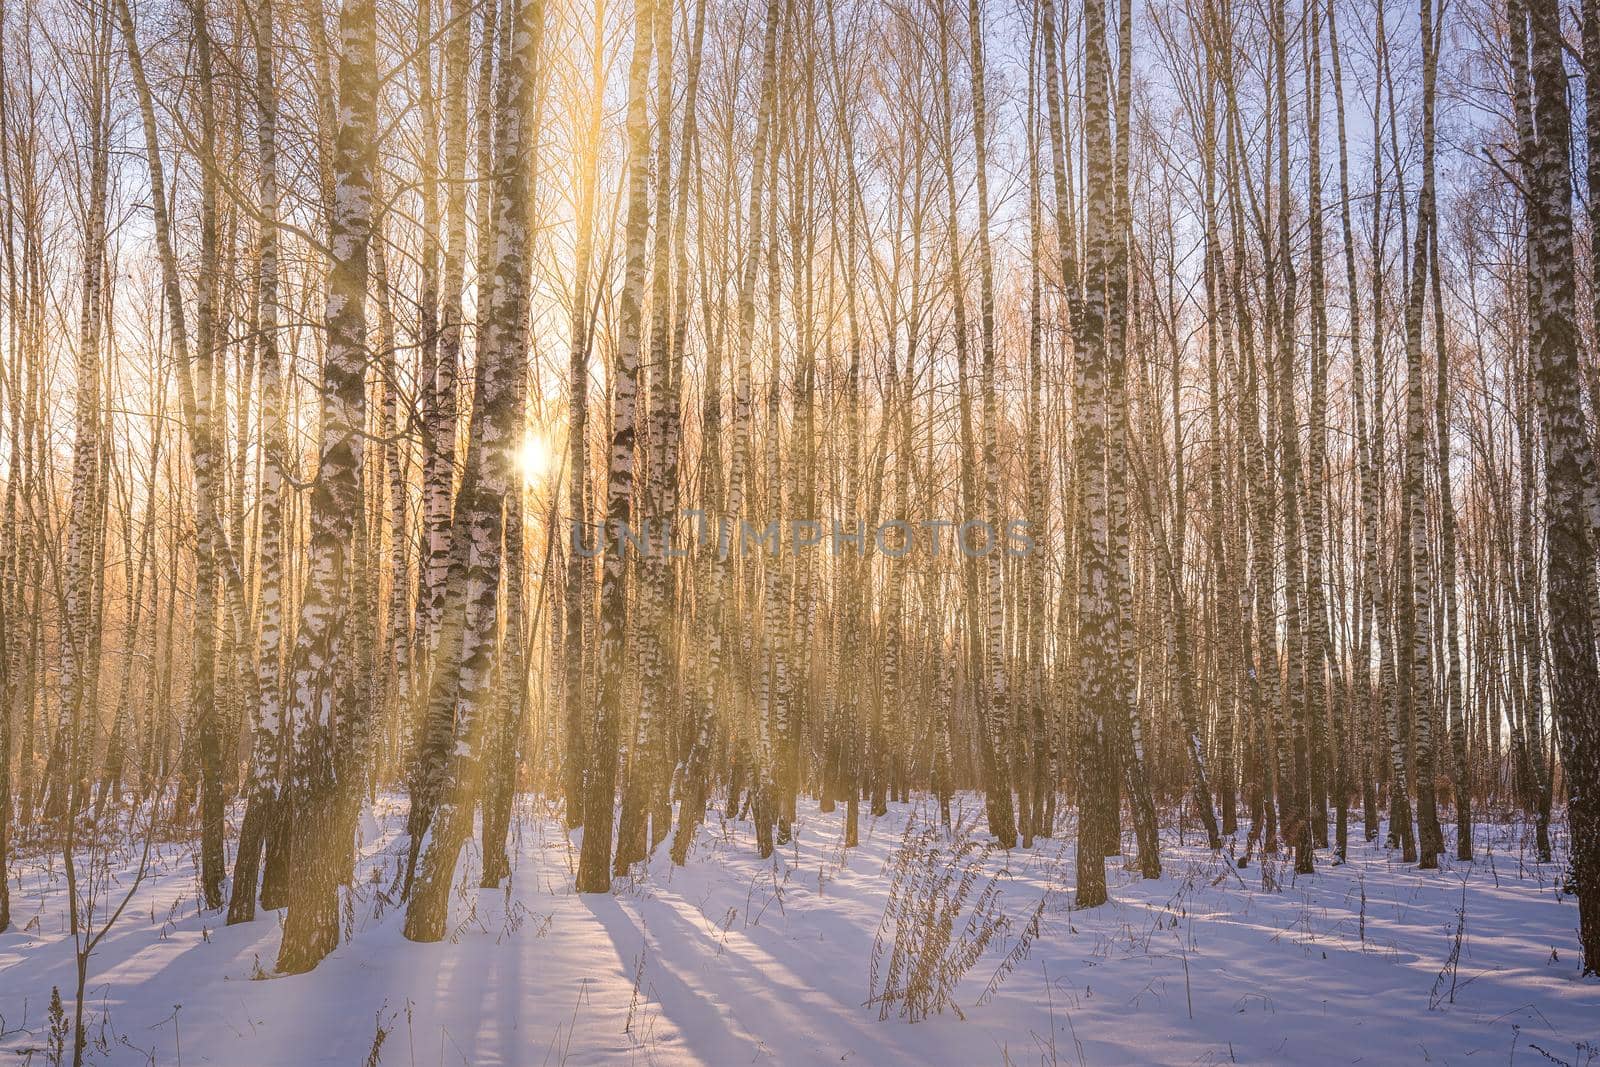 Sunset or sunrise in a birch grove with winter snow. Rows of birch trunks with the sun's rays. by Eugene_Yemelyanov